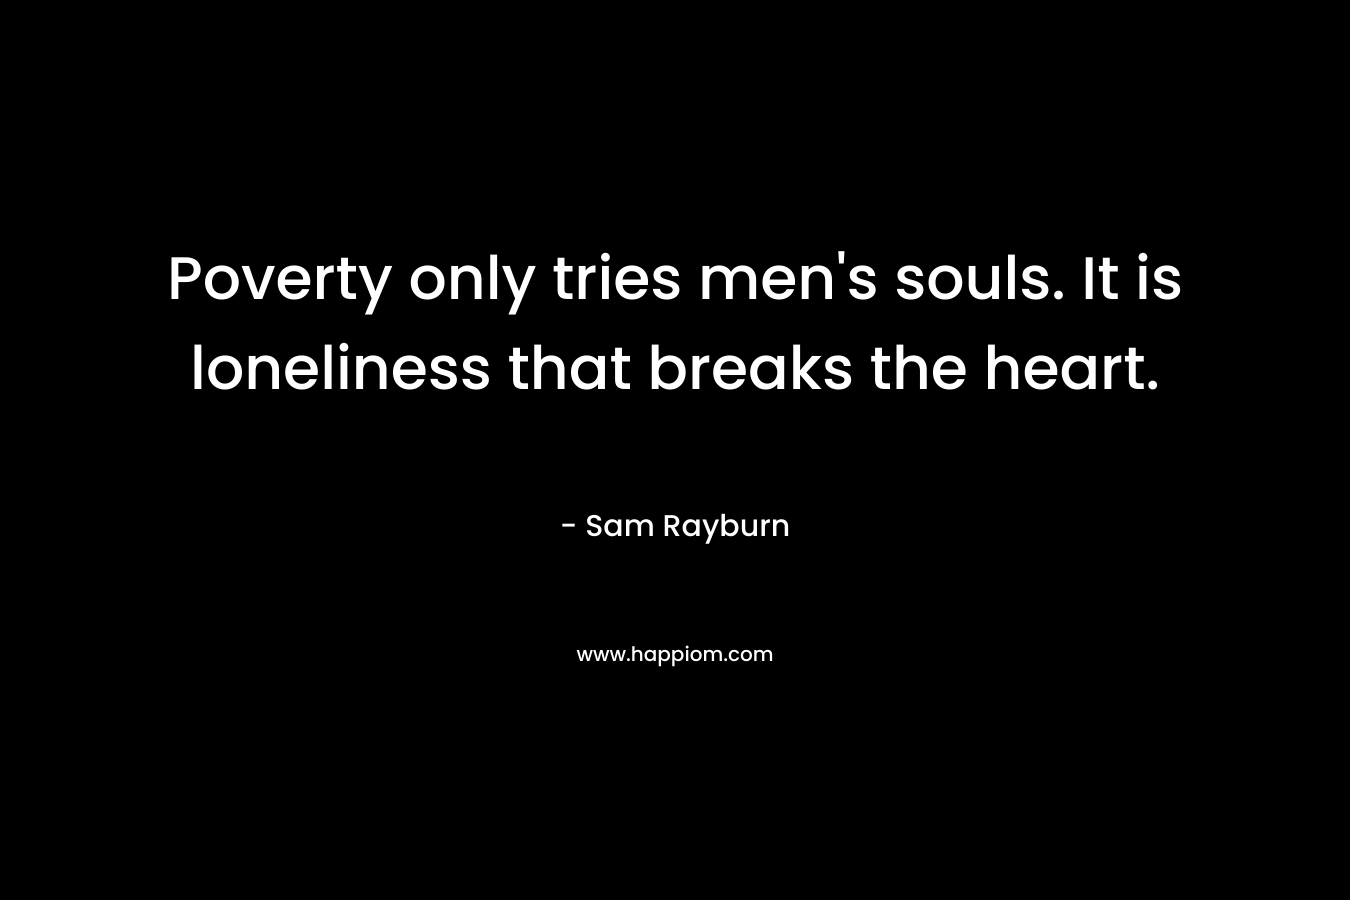 Poverty only tries men's souls. It is loneliness that breaks the heart.